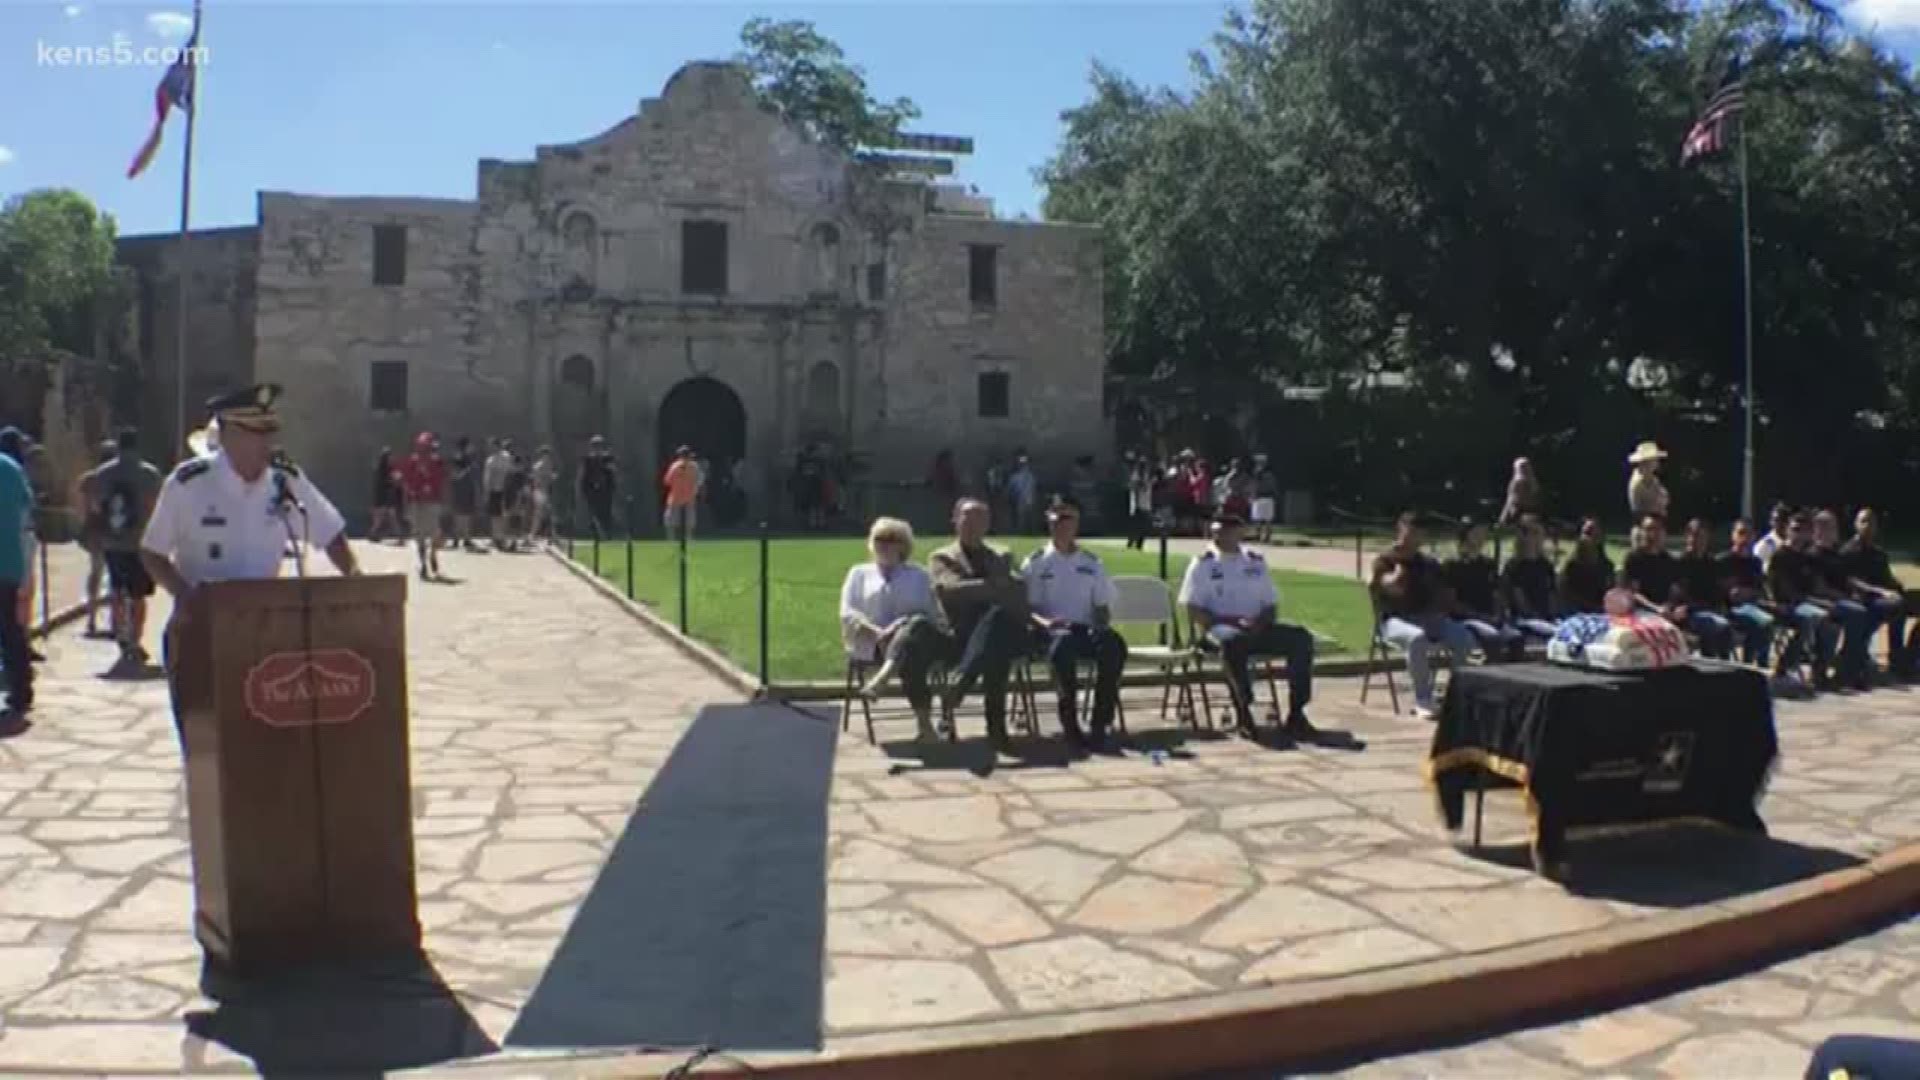 Today the Army celebrated its 243rd birthday in front of one of the oldest historical landmarks: The Alamo. Eyewitness News reporter Adi Guajardo was there.